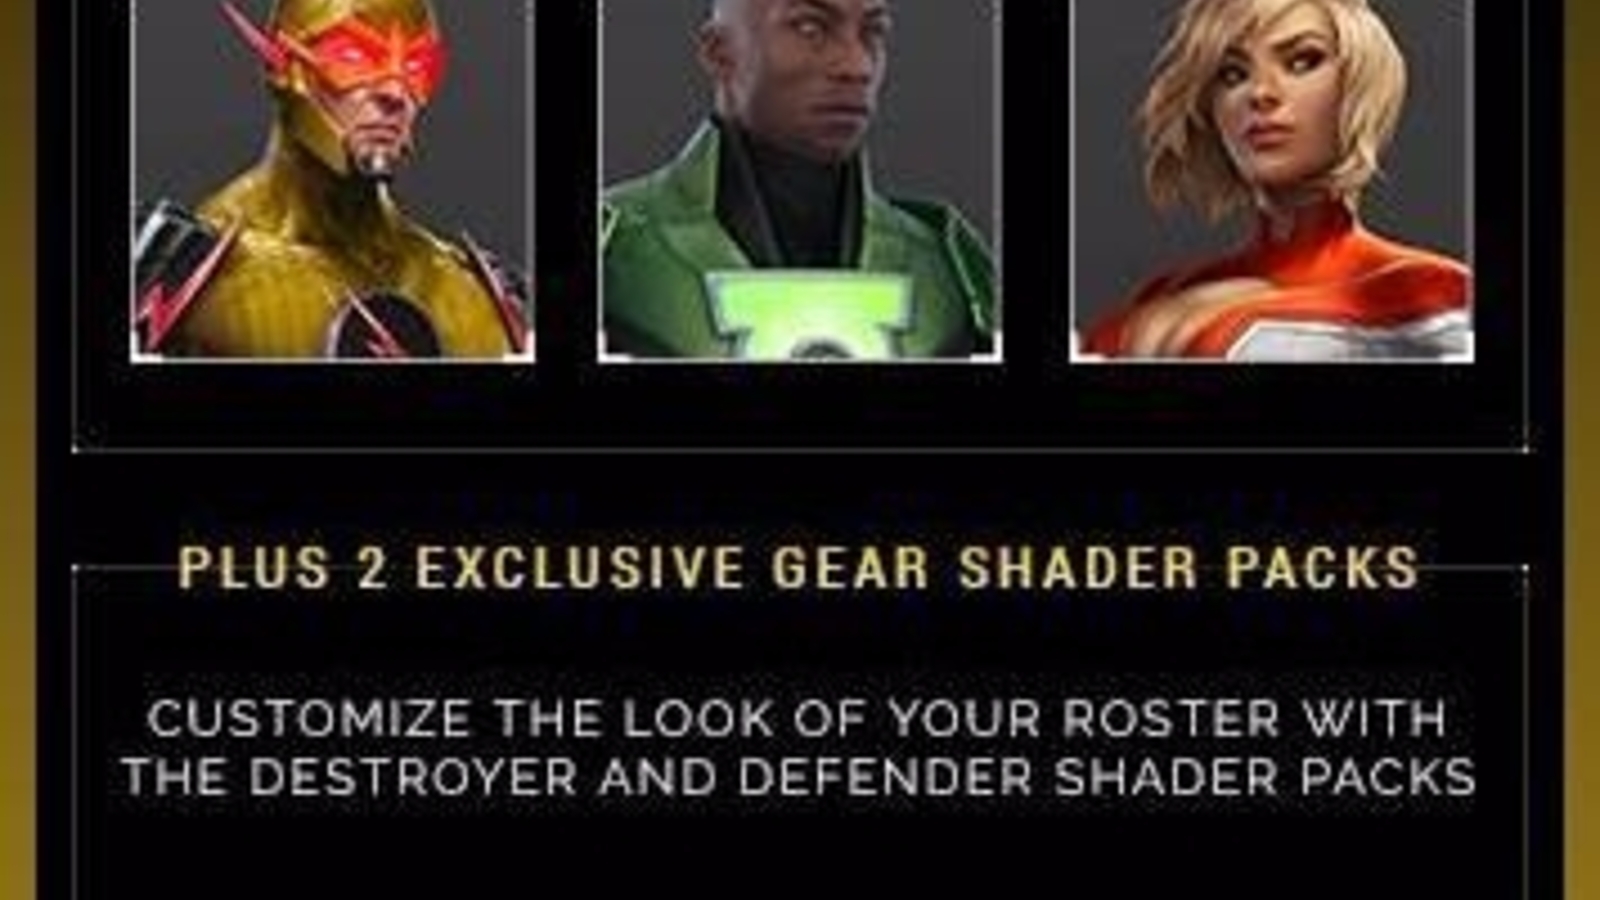 Injustice special editions include dlc characters as premier skins